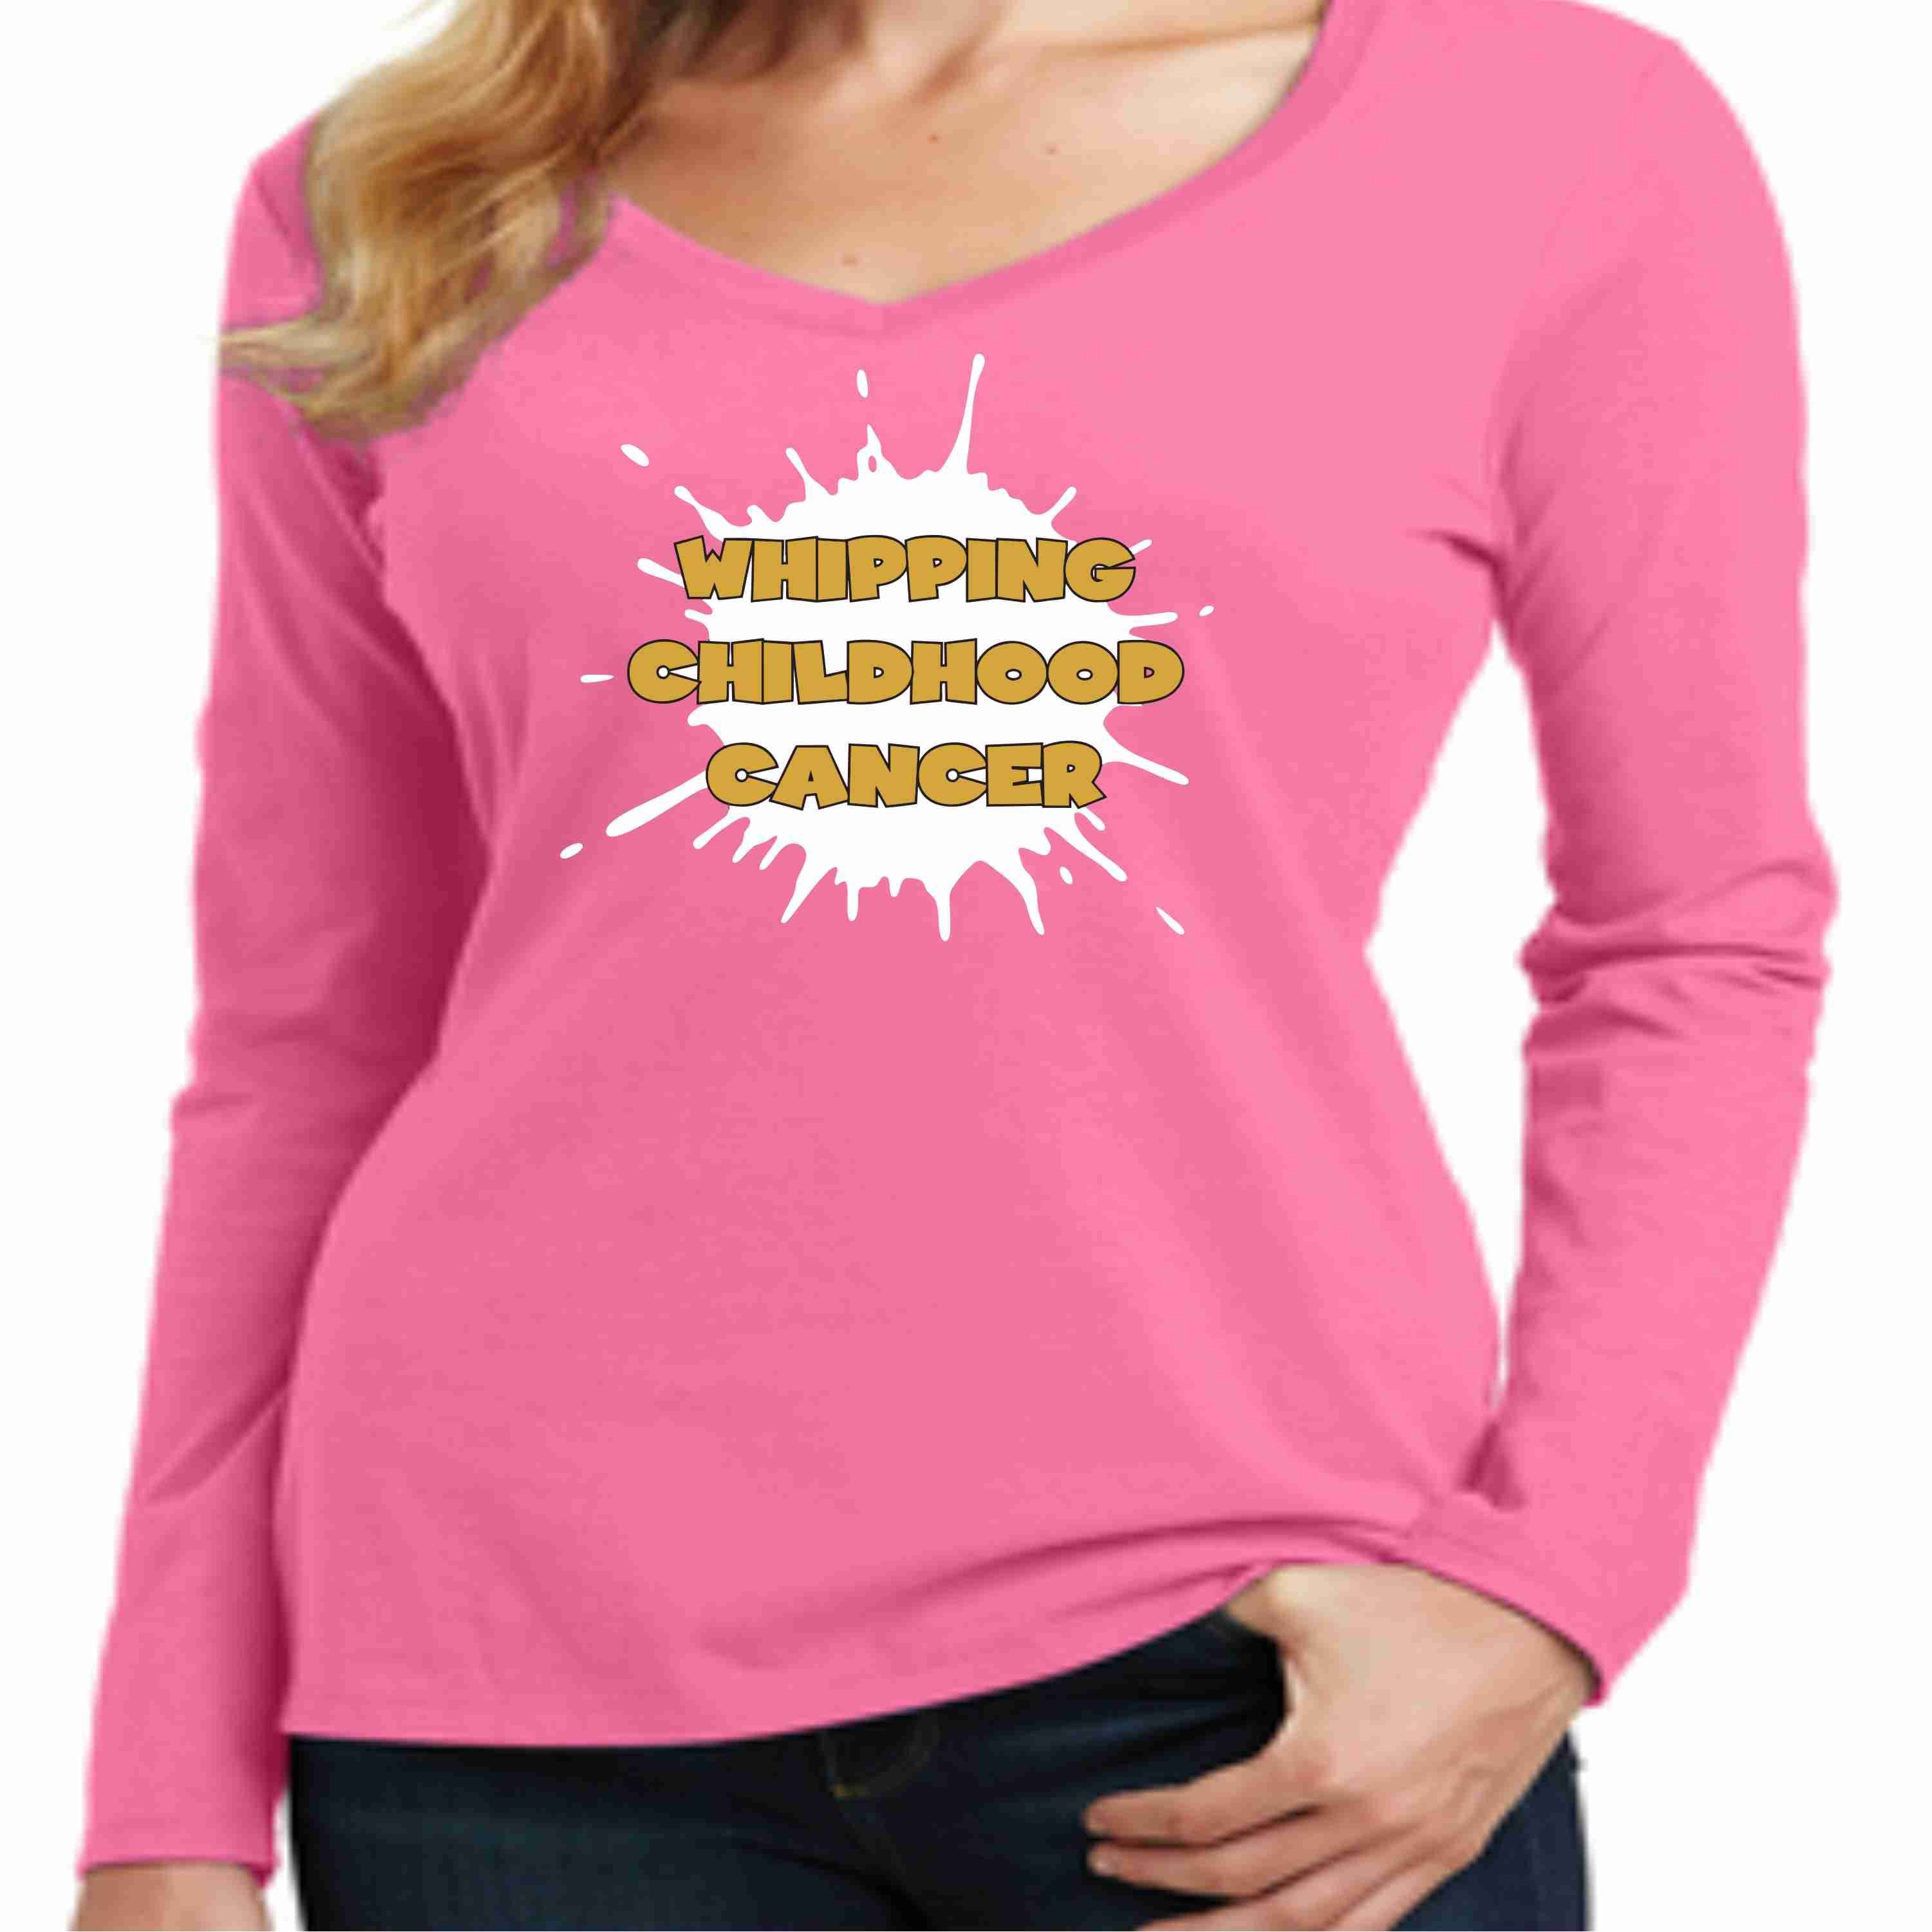 Gold is the New Pink -Whipping Childhood Cancer Long Sleeve Screen Printed Shirt - Womens VIEW ALL DESIGNS Becky's Boutique 